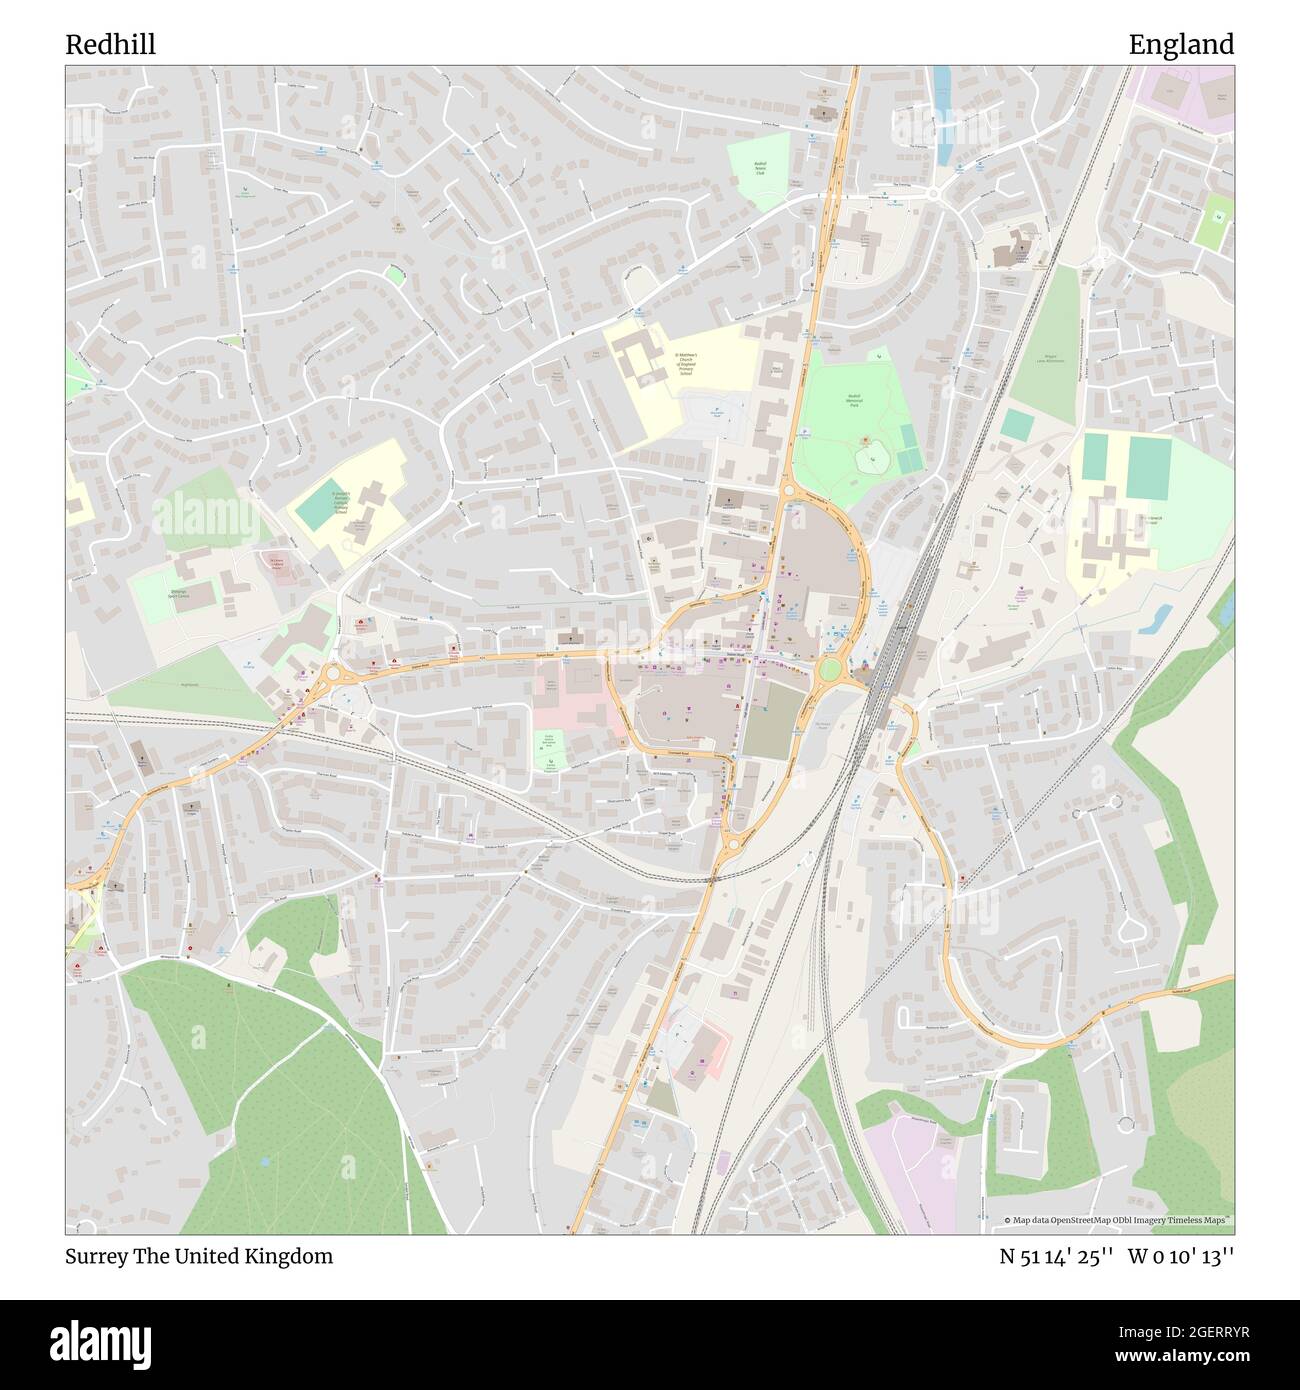 Redhill, Surrey, United Kingdom, England, N 51 14' 25'', W 0 10' 13'', map, Timeless Map published in 2021. Travelers, explorers and adventurers like Florence Nightingale, David Livingstone, Ernest Shackleton, Lewis and Clark and Sherlock Holmes relied on maps to plan travels to the world's most remote corners, Timeless Maps is mapping most locations on the globe, showing the achievement of great dreams Stock Photo